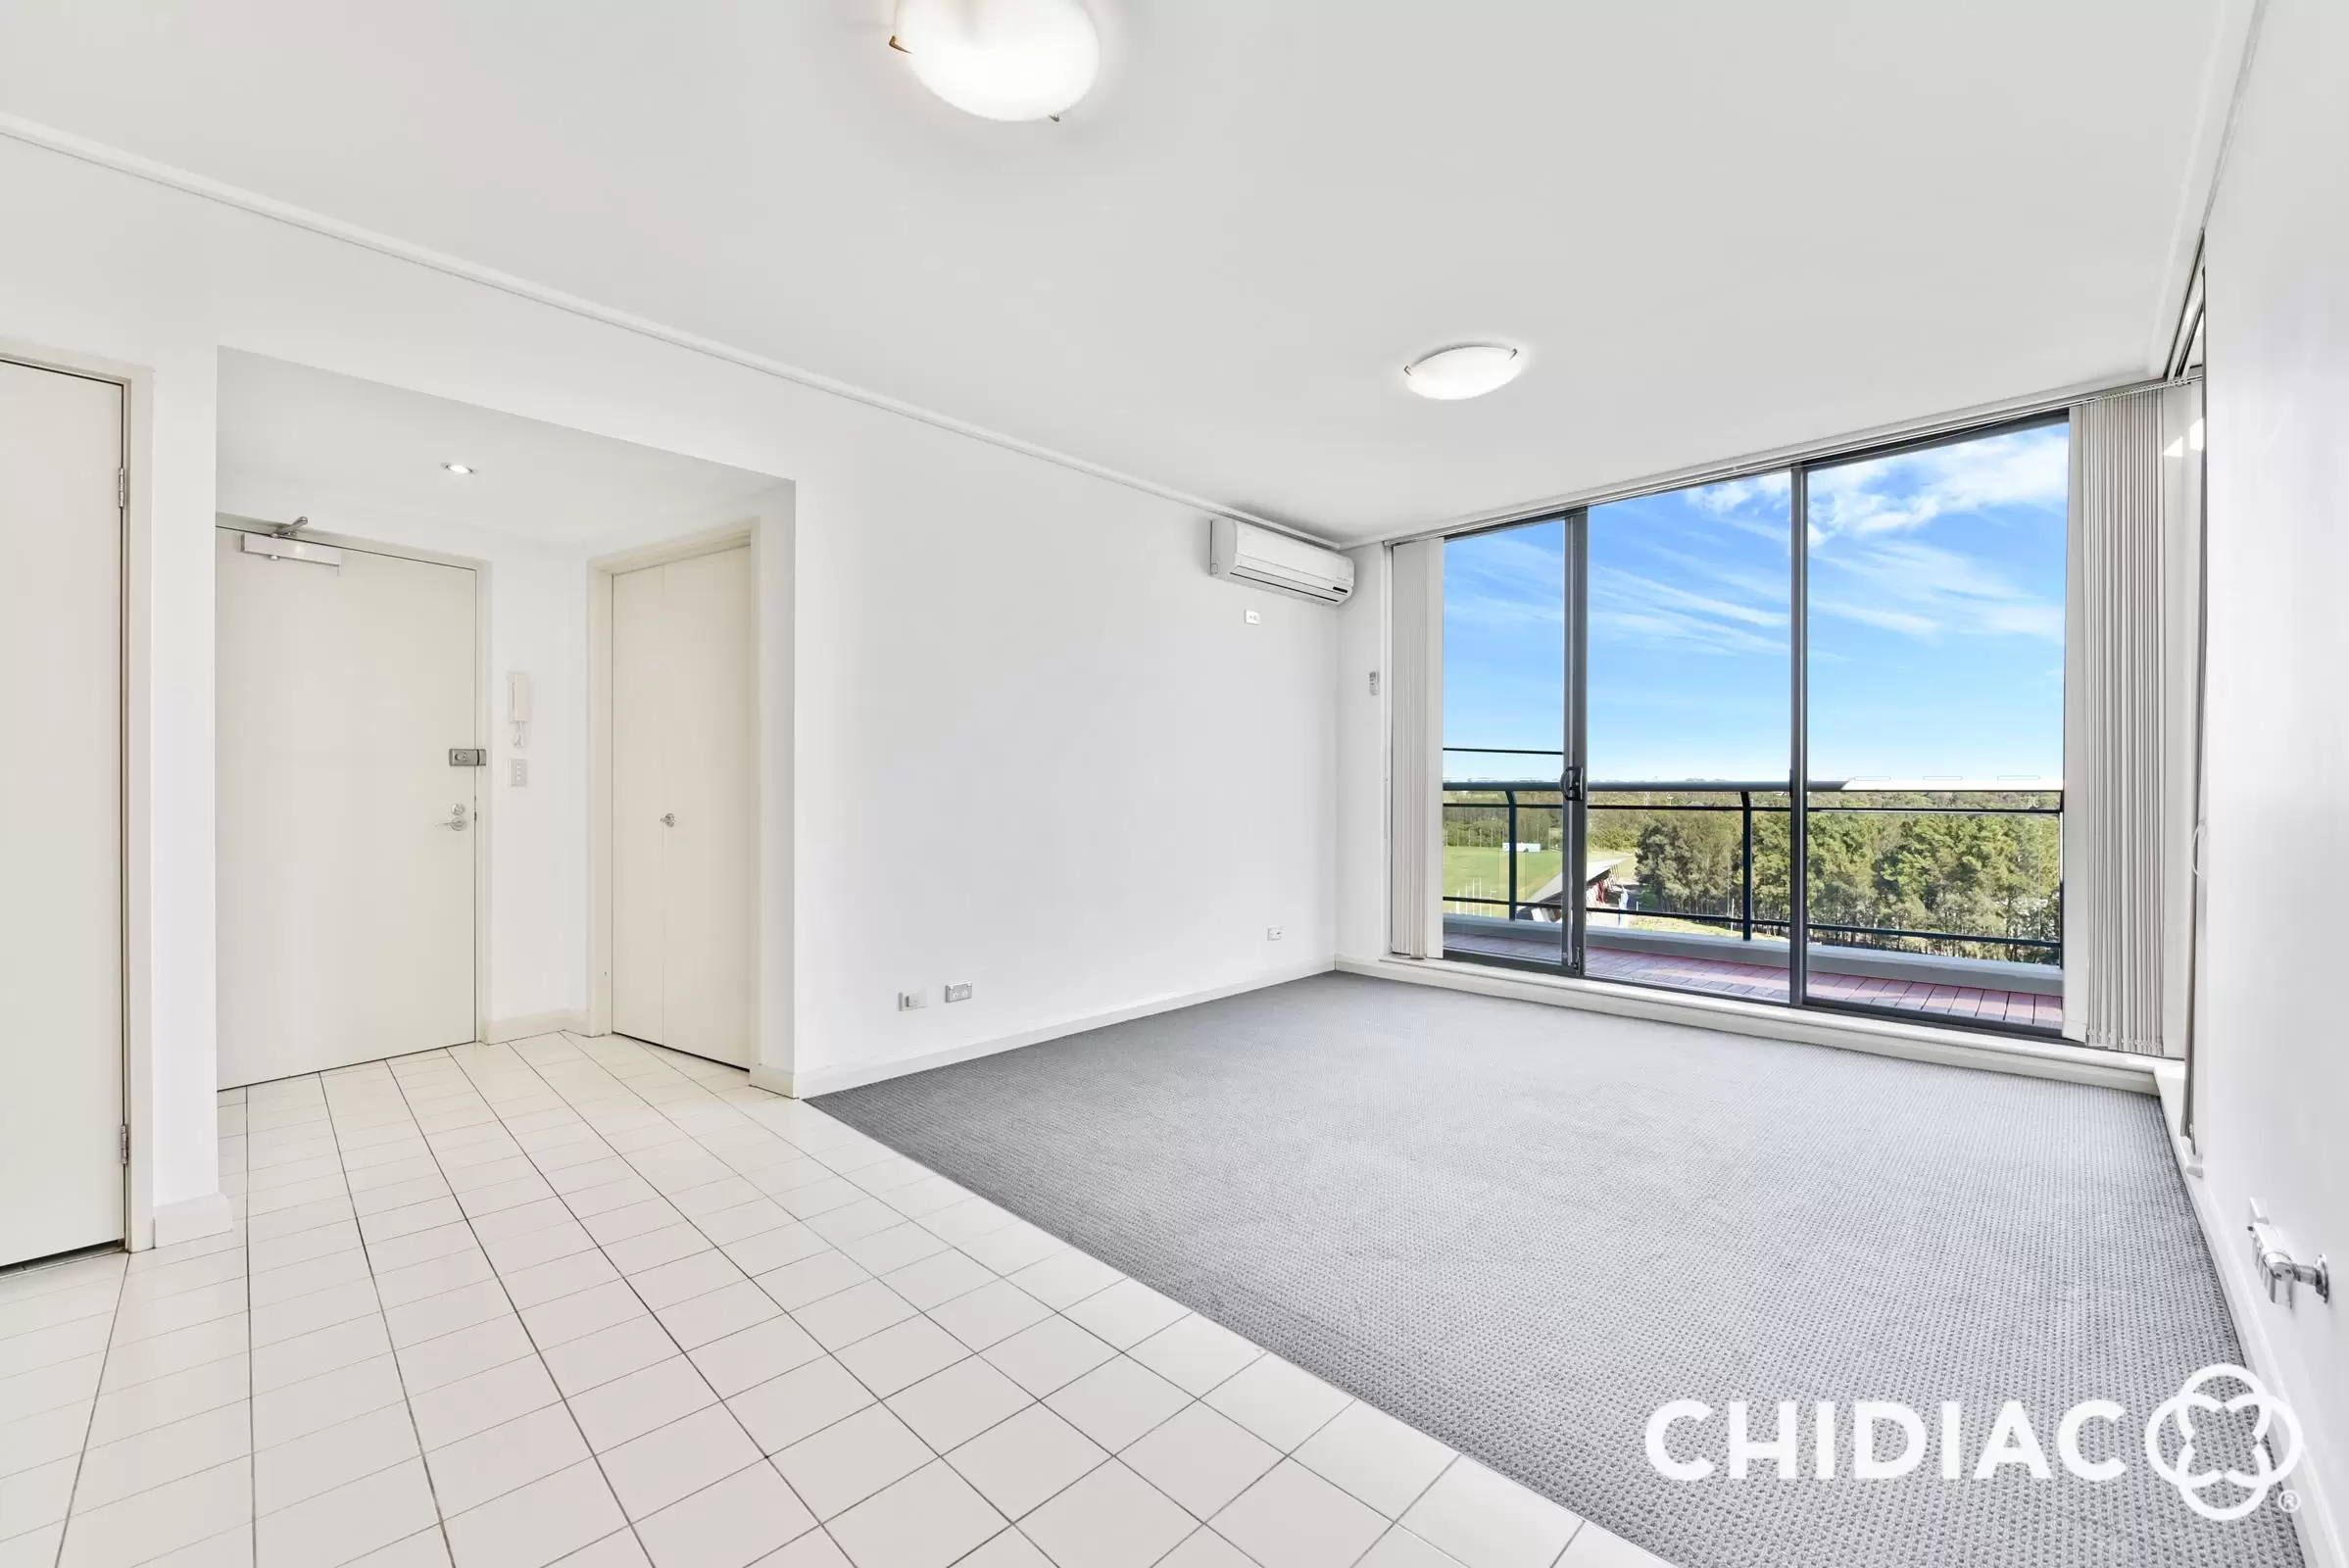 100/27 Bennelong Parkway, Wentworth Point Leased by Chidiac Realty - image 1